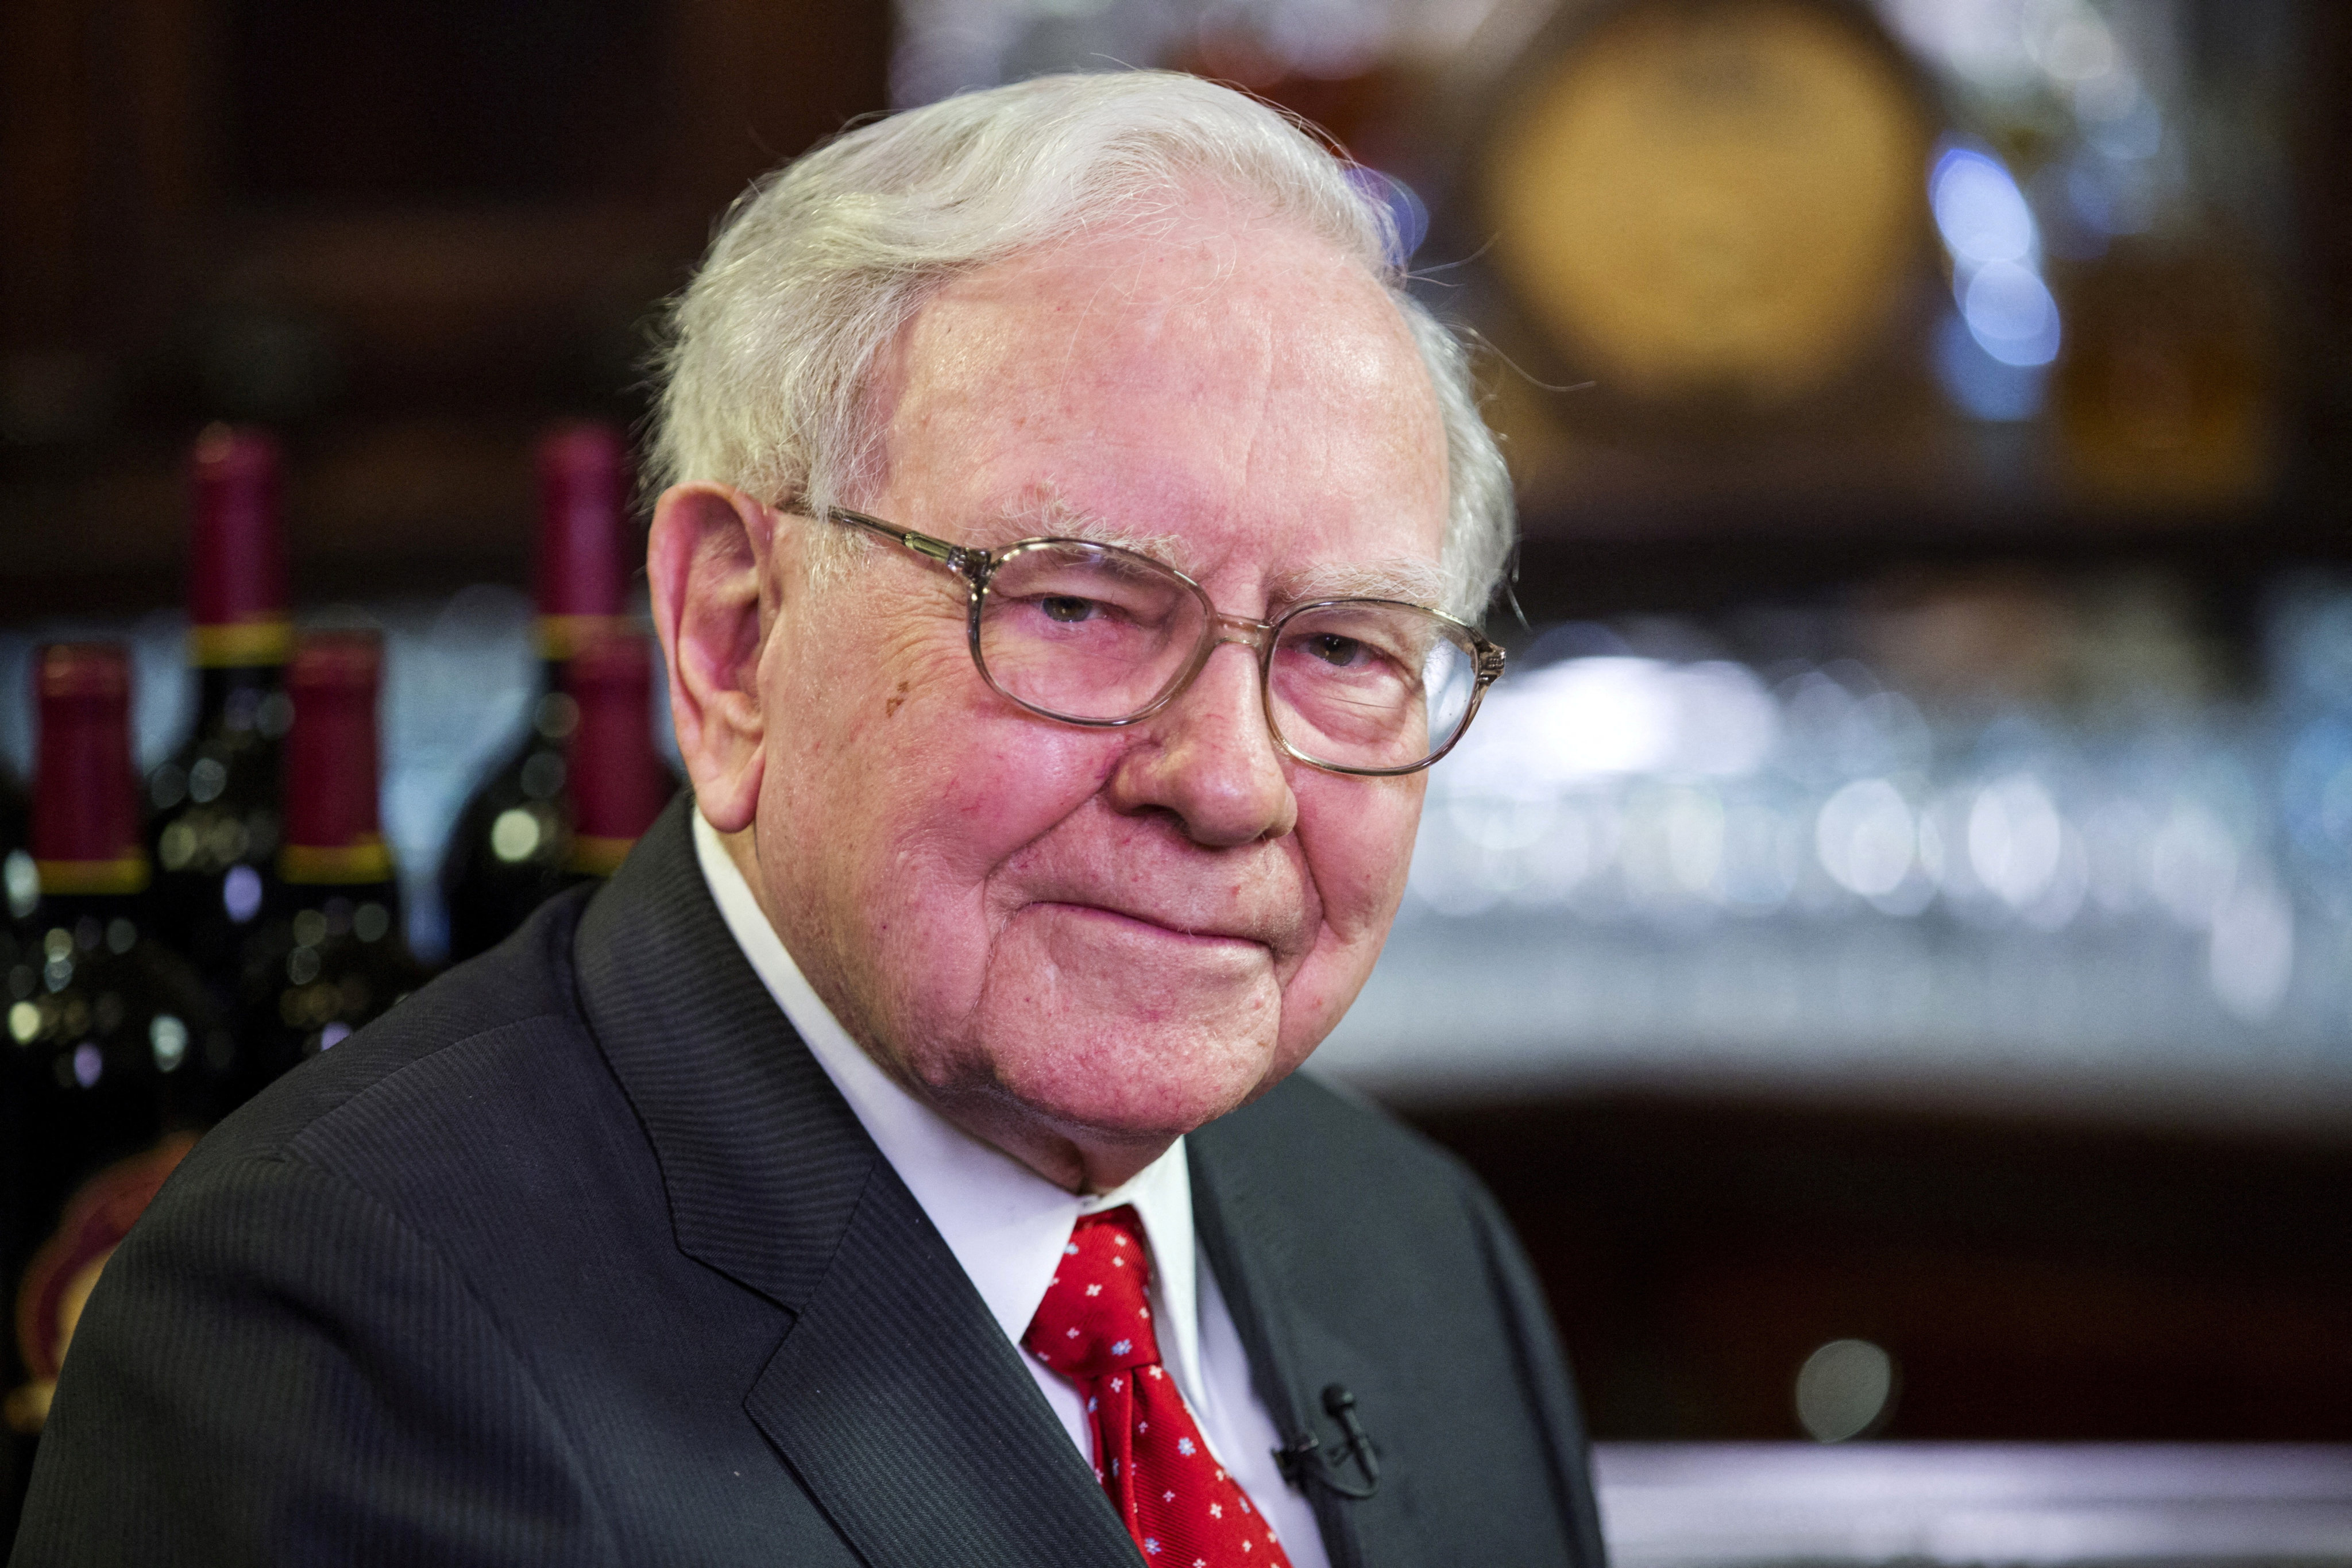 Warren Buffett, chairman, CEO and largest shareholder of Berkshire Hathaway, pictured in 2015. Photo: Reuters